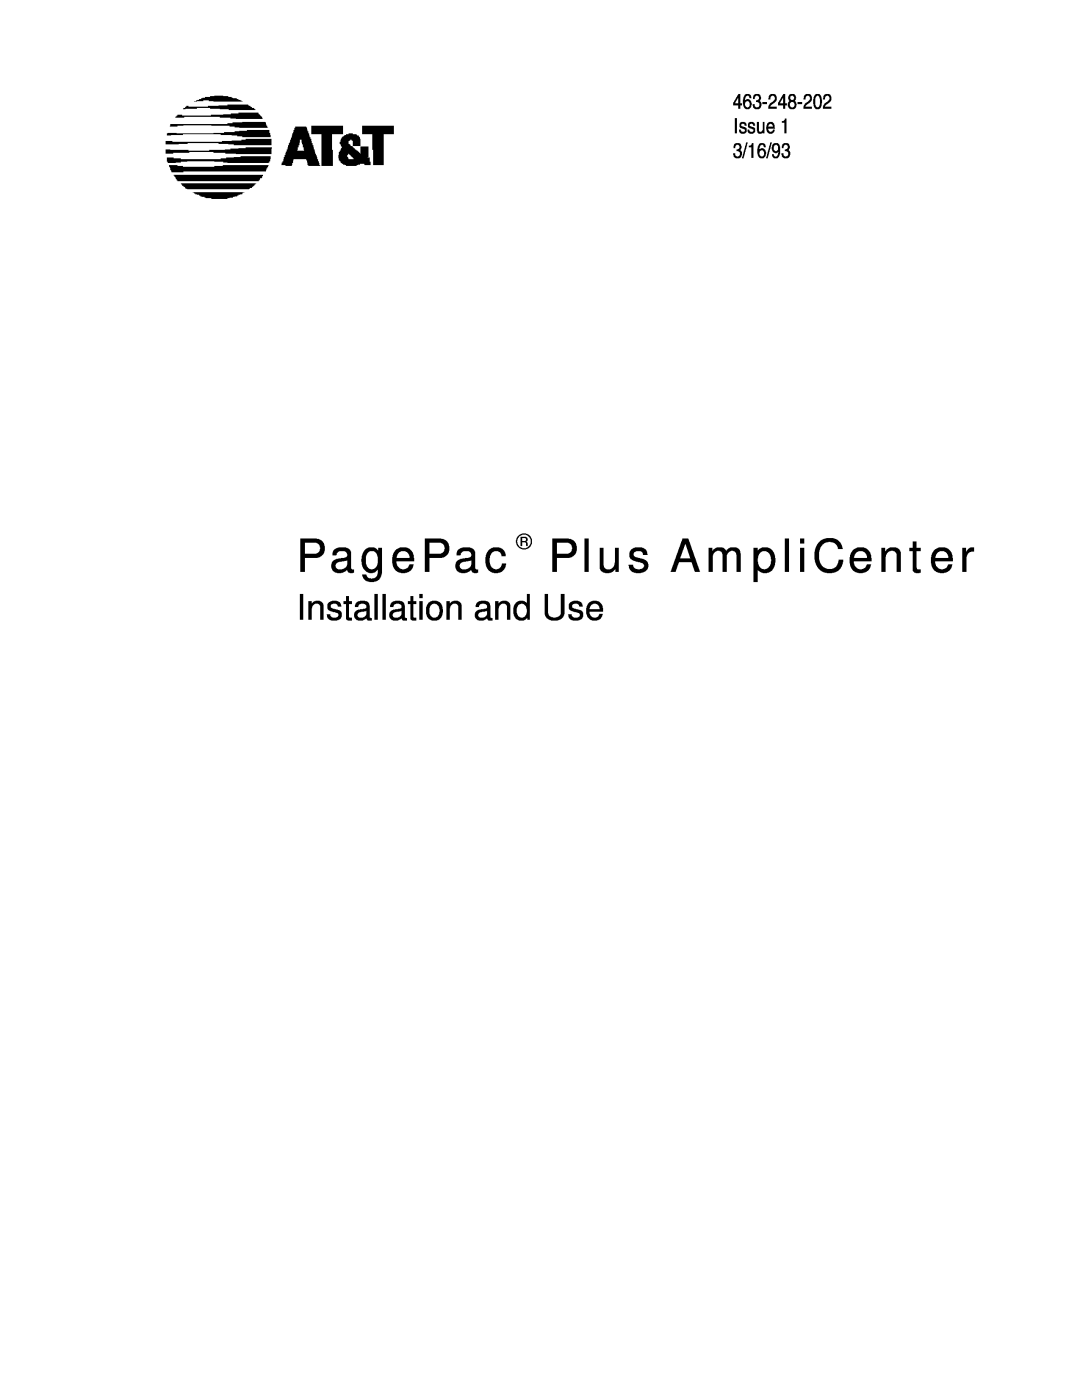 ATTO Technology 463-248-202 manual Issue 3/16/93, PagePac Plus AmpliCenter, Installation and Use 